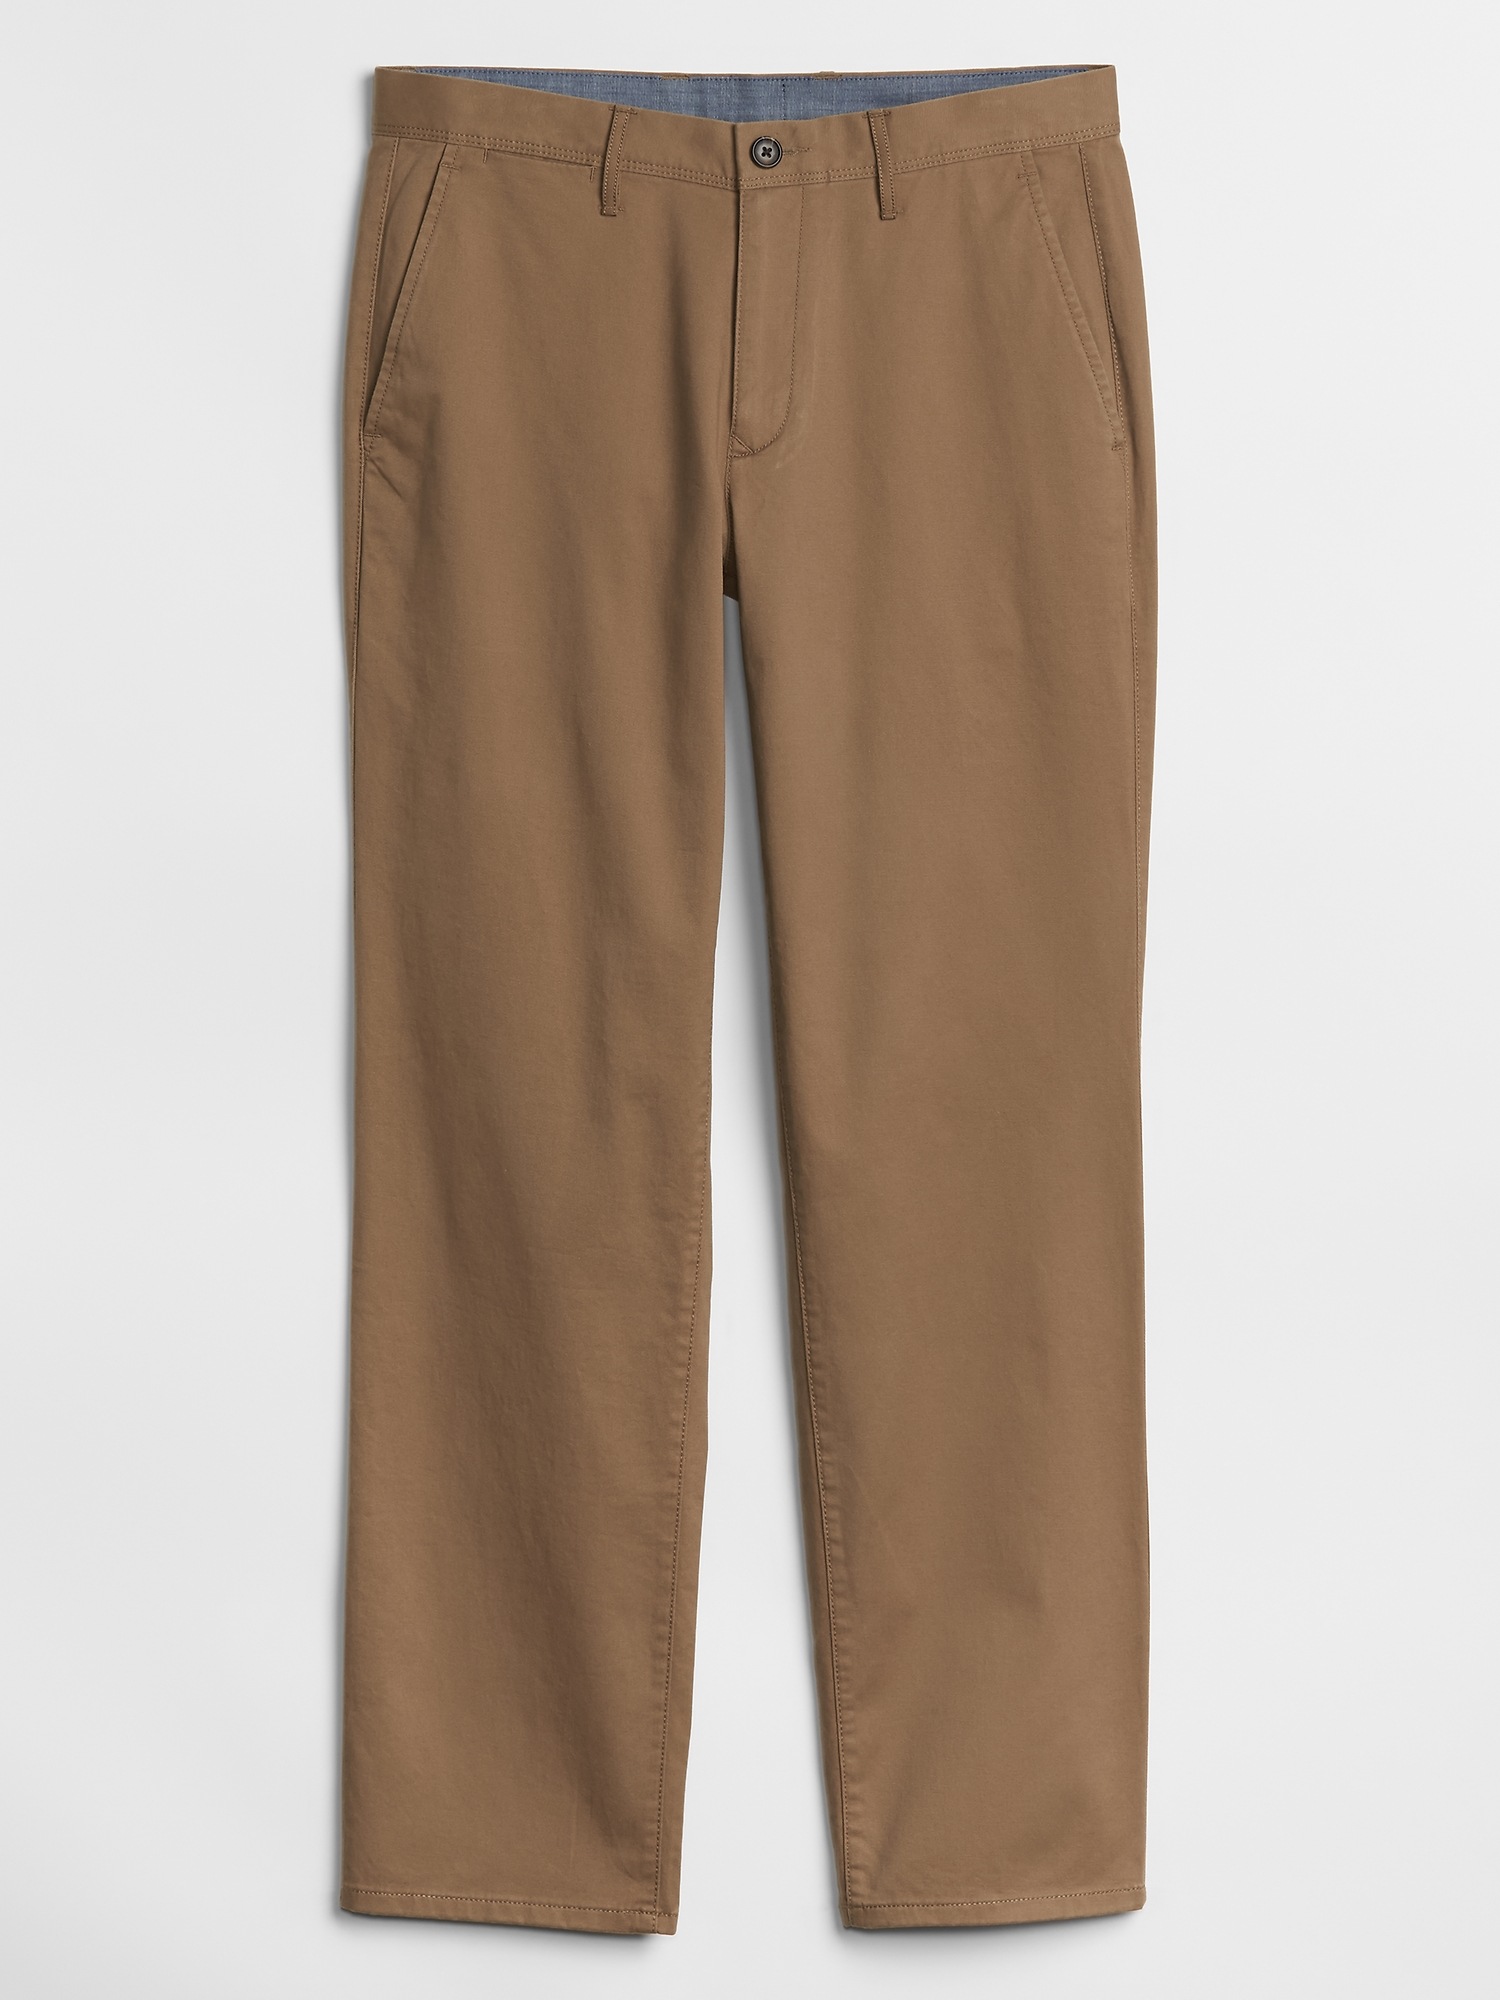 Khakis in Straight Fit with GapFlex